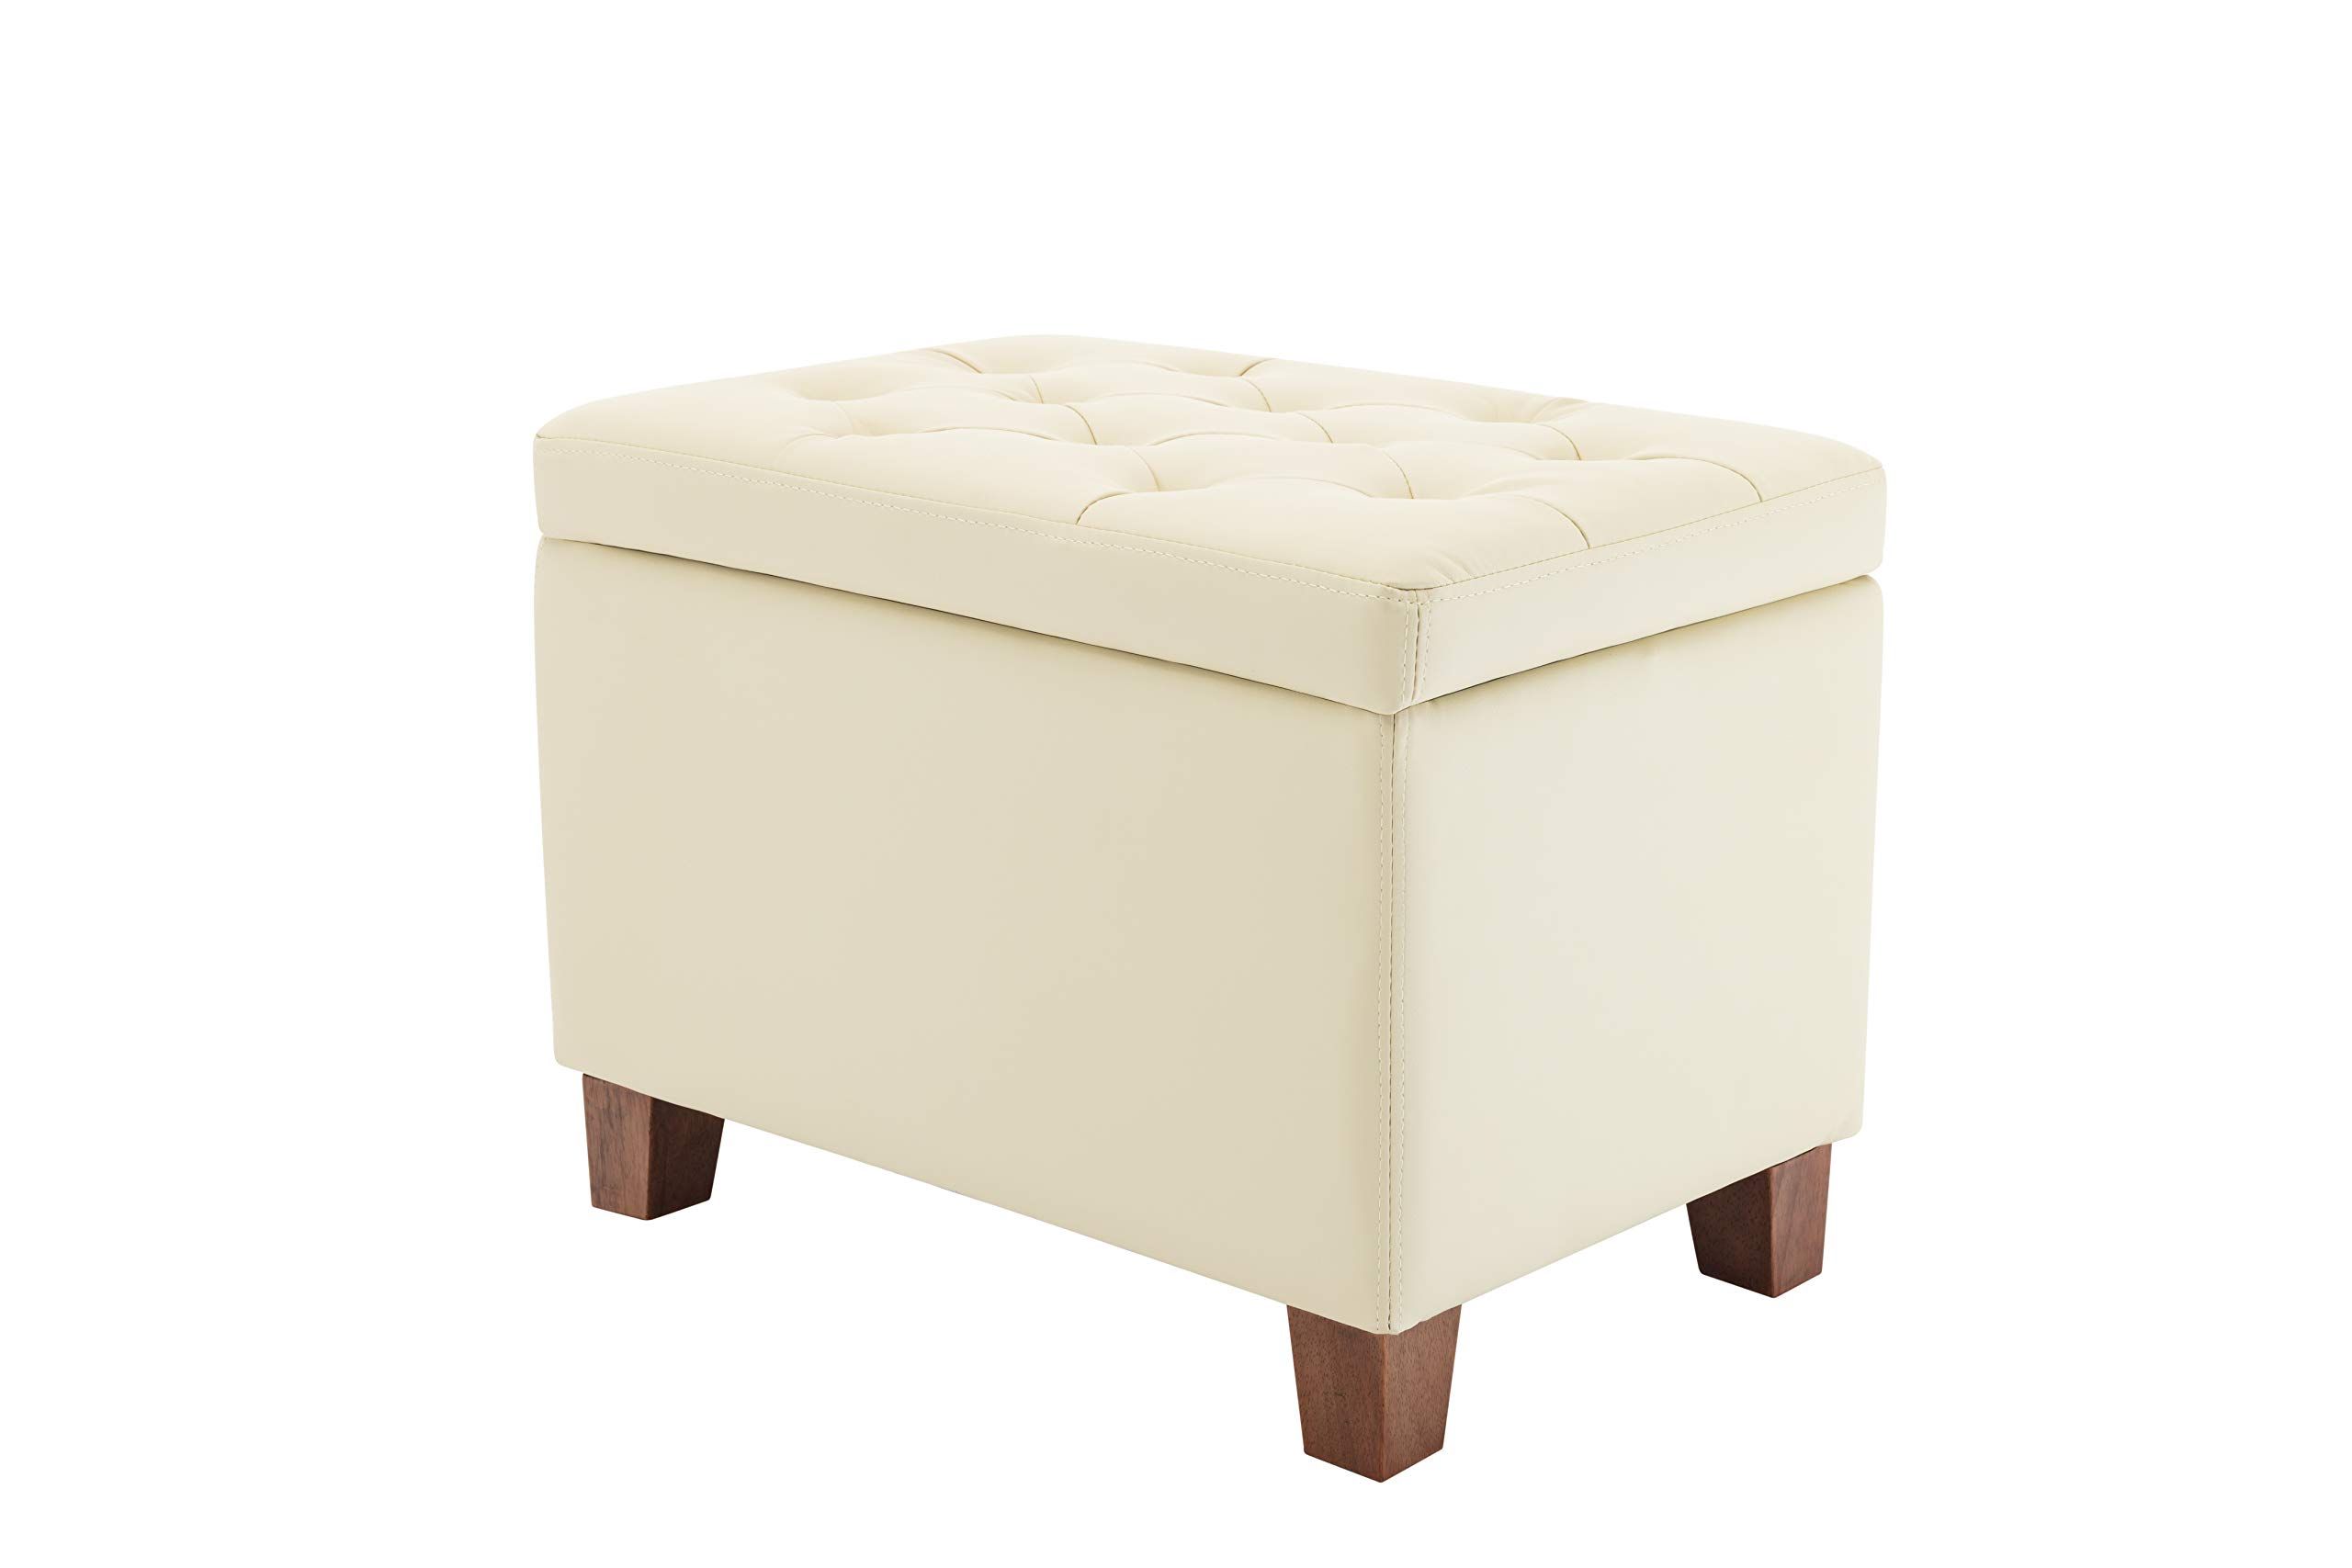 Fashionable Amazon: Wovenbyrd 24 Inch Tufted Faux Leather Storage Ottoman With  Hinged Lid, Cream : Home & Kitchen Throughout 24 Inch Ottomans (View 3 of 10)